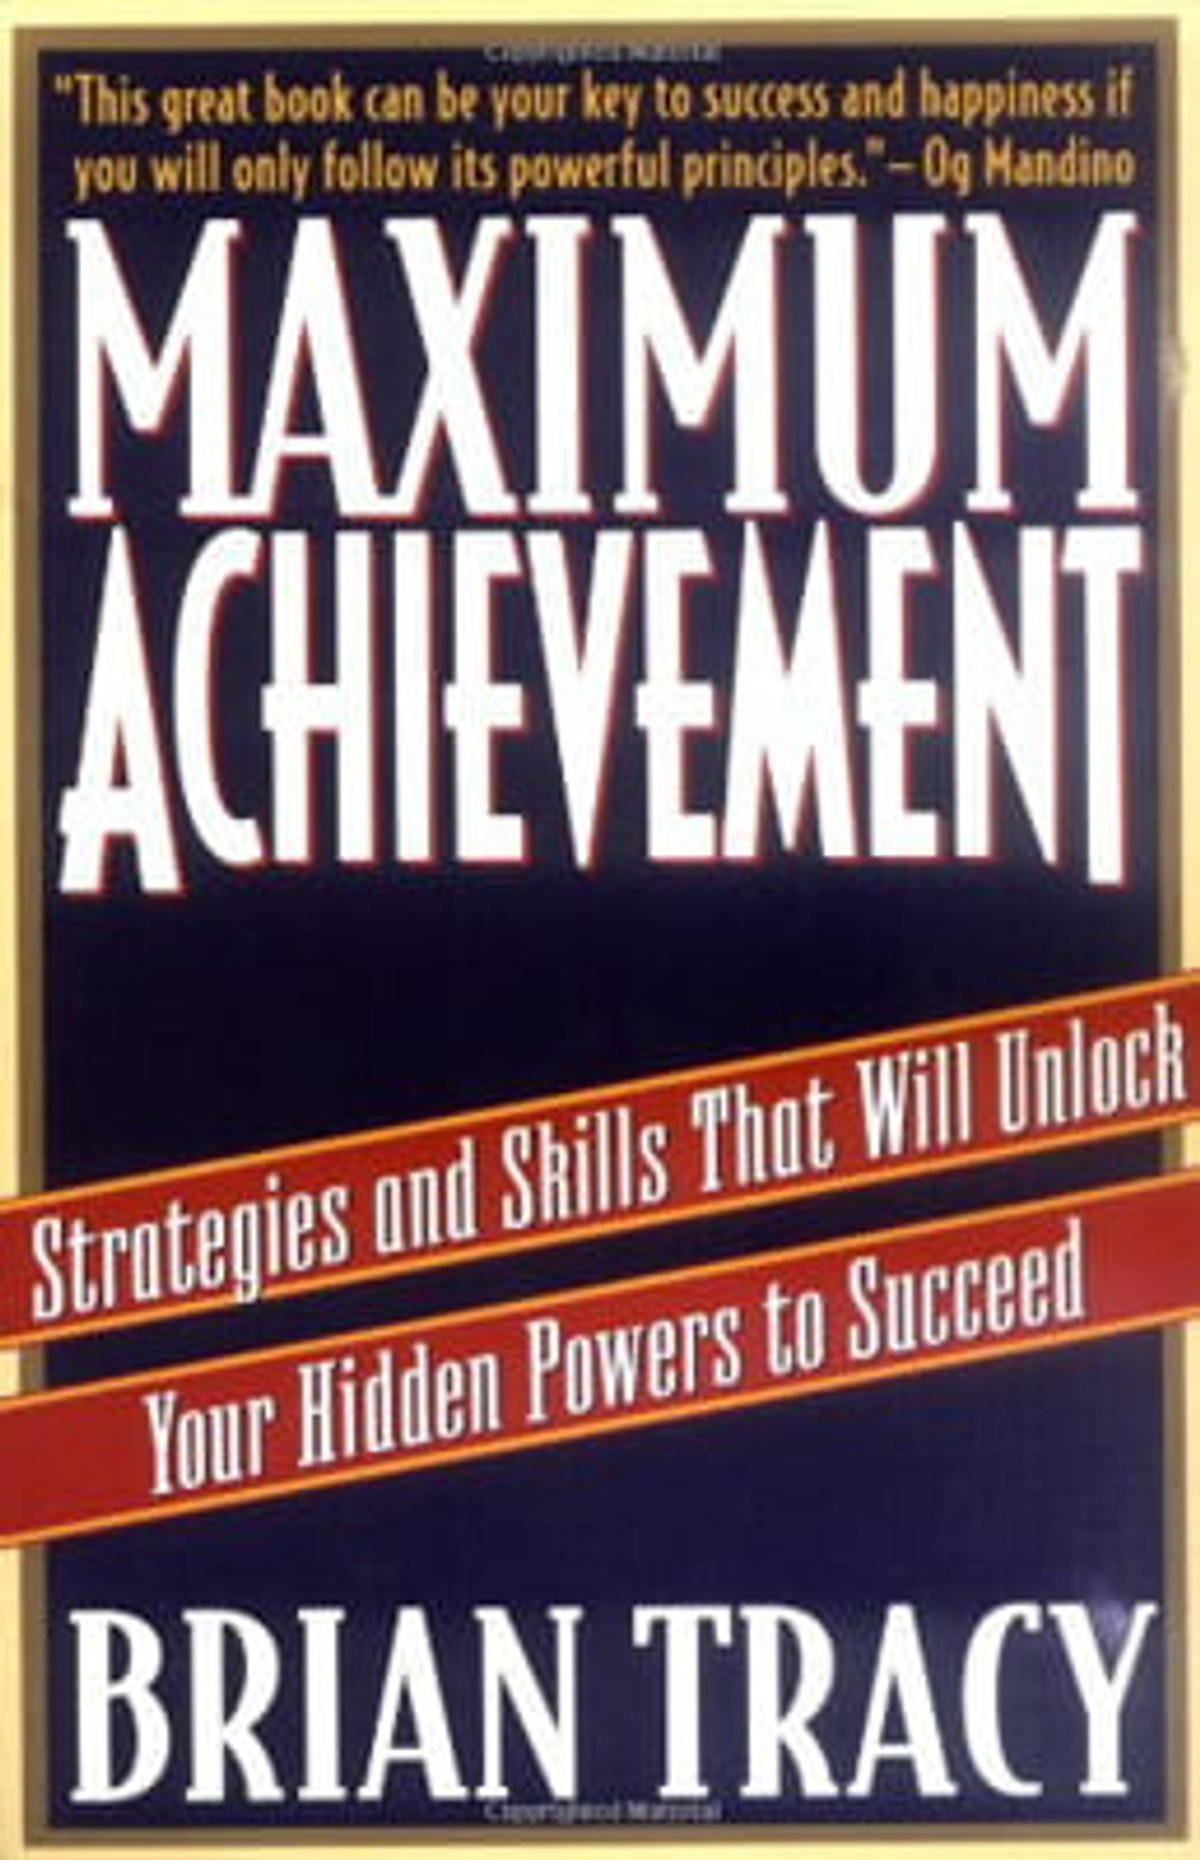 Maximum Achievement : Strategies and Skills That Will Unlock Your Hidden Powers to Succeed